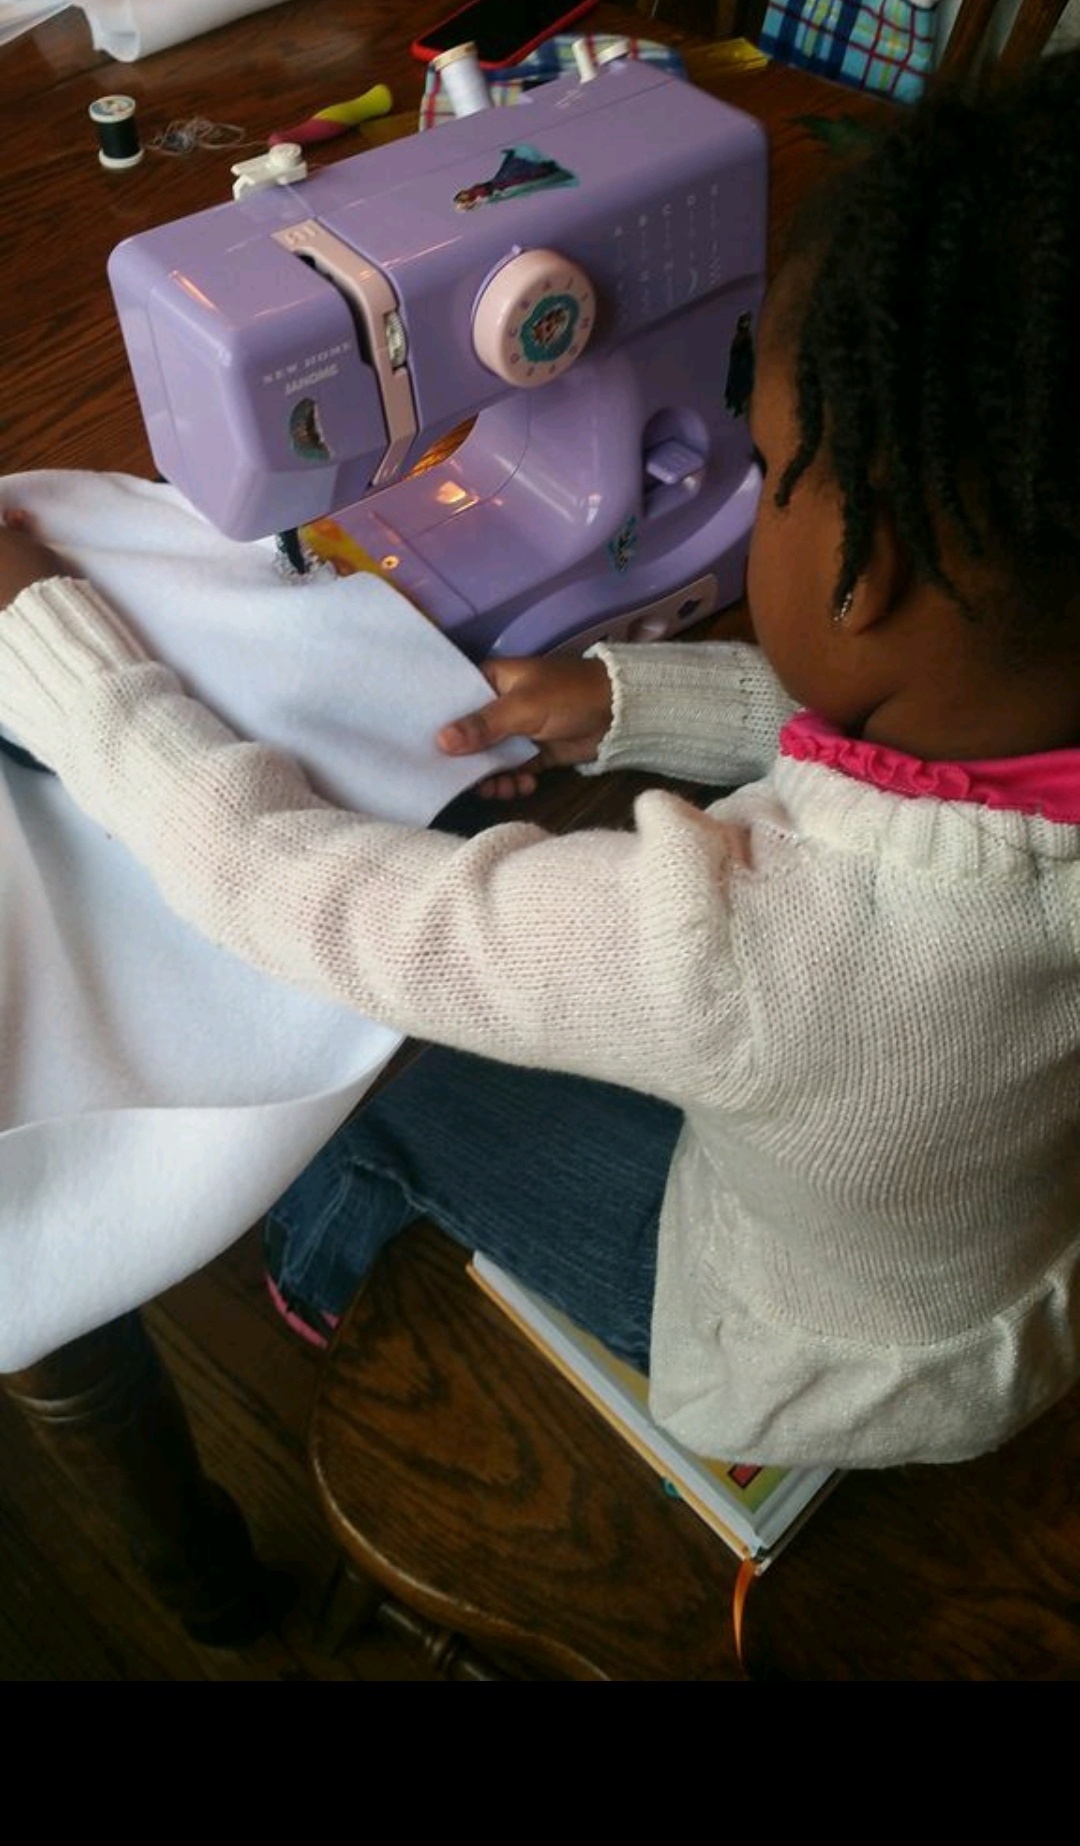 Paris Green Sews at the age of four